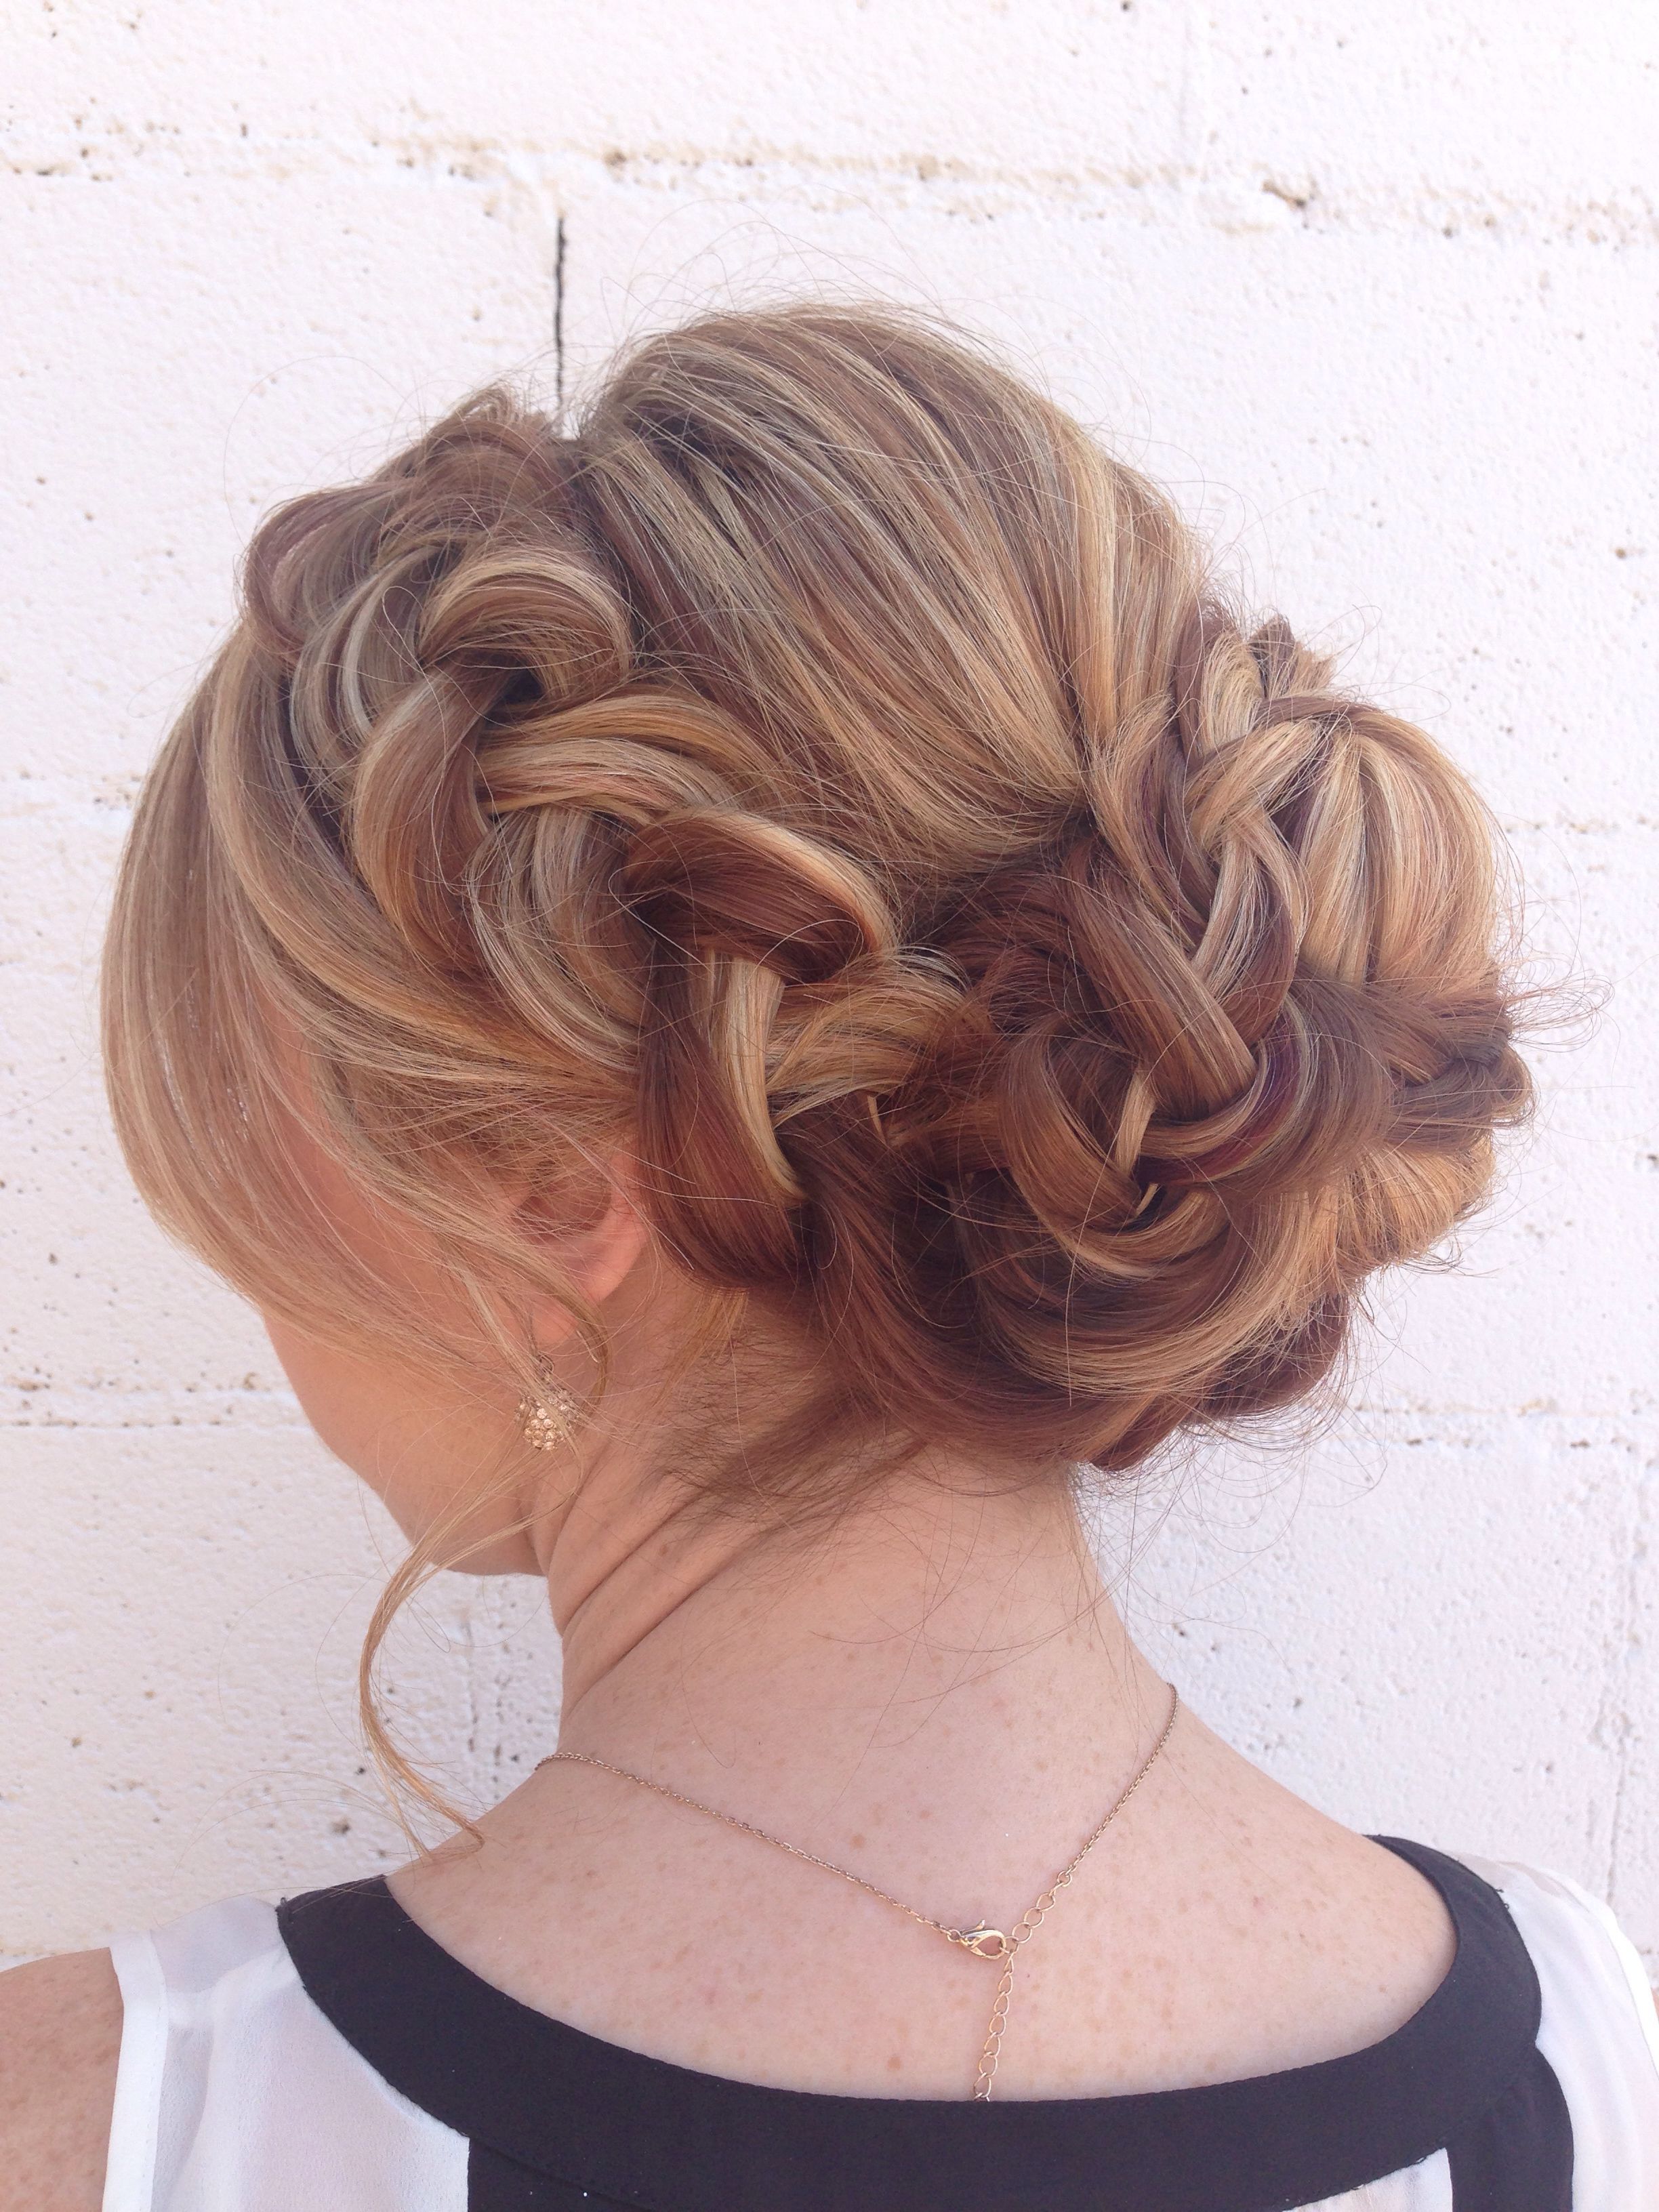 Soft, Braided Updo For Long, Thick Hair (View 17 of 25)